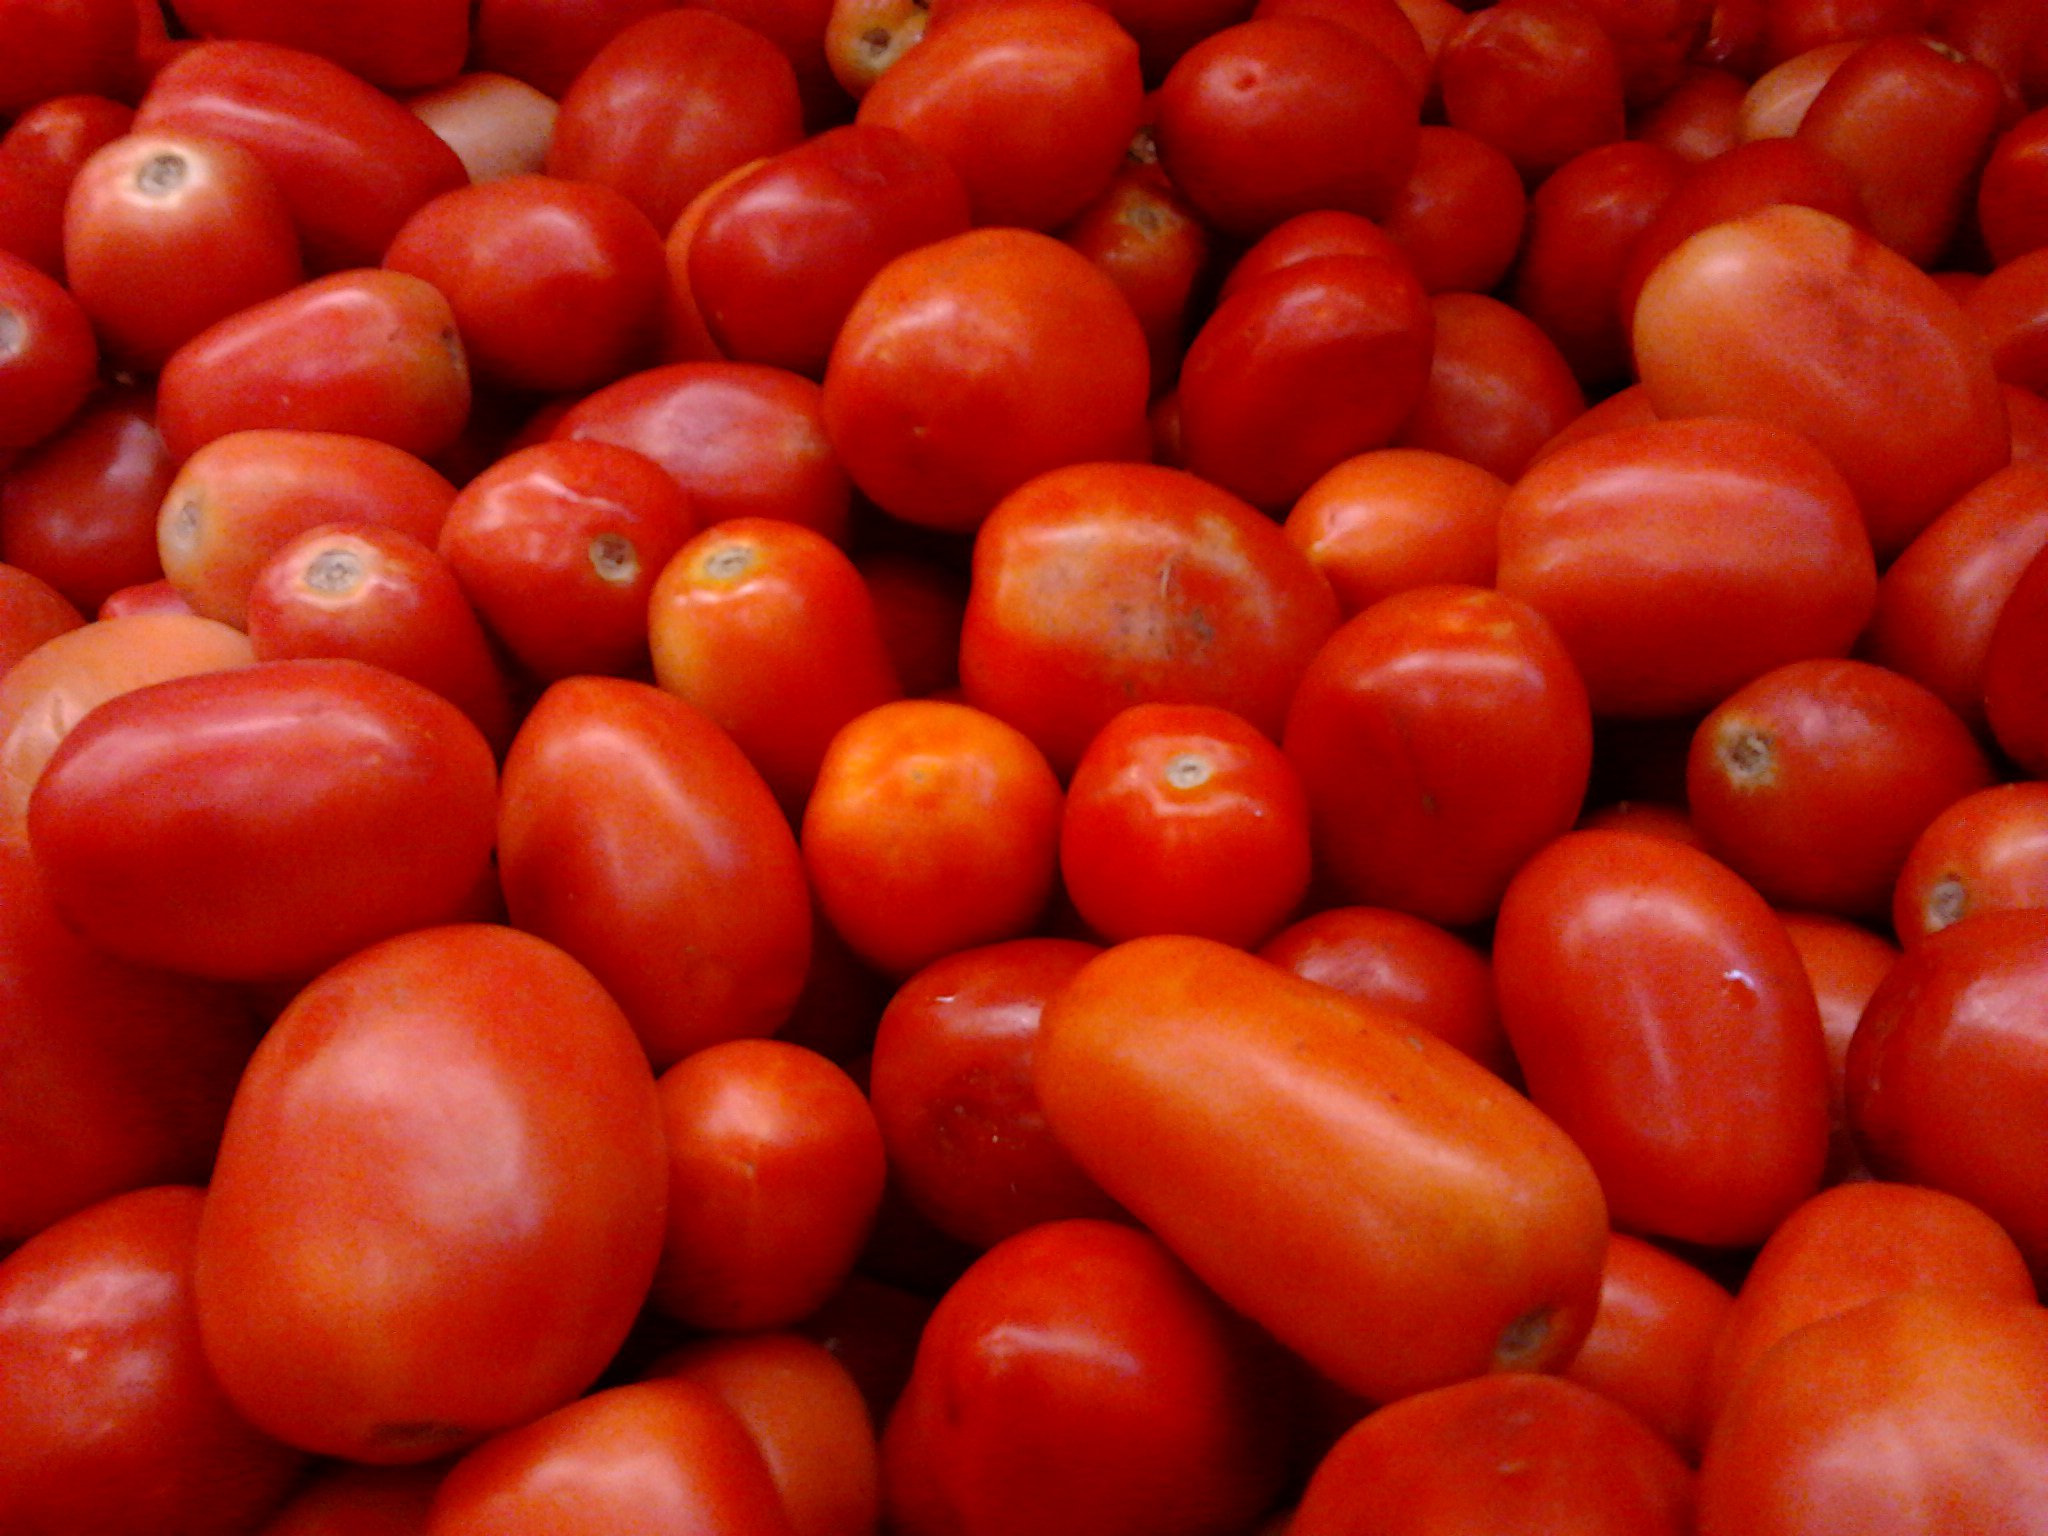 Bad News Tomato Prices To Remain Sky-High At Rs100 Per Kg For Another 2 Months